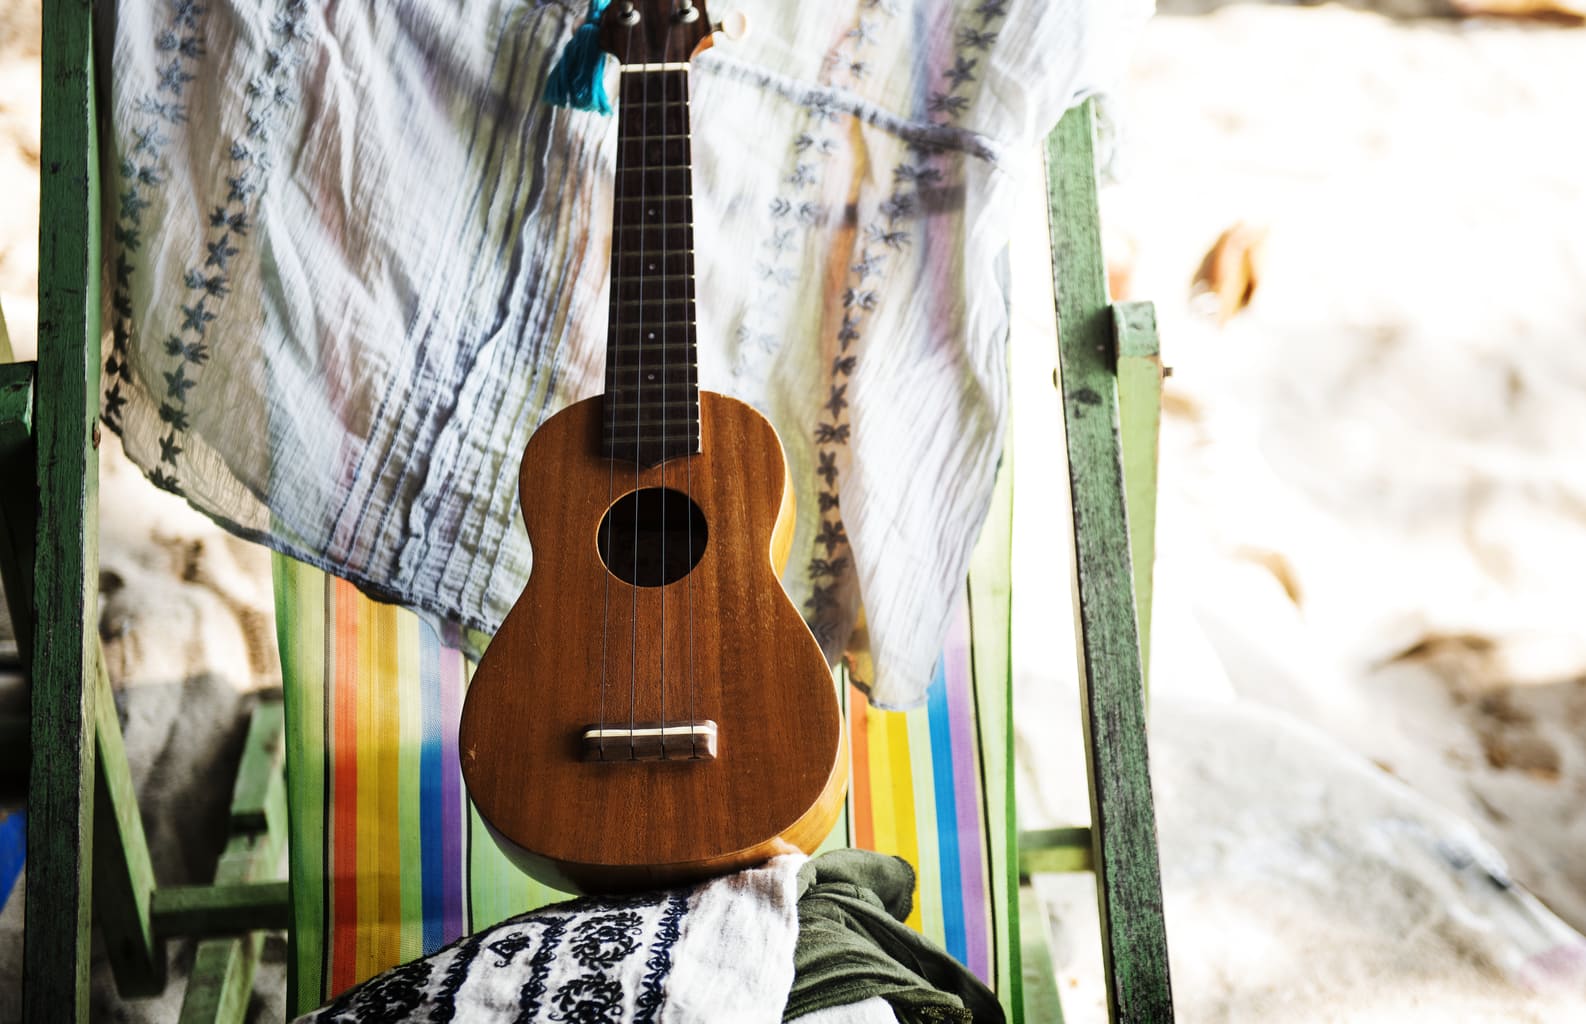 Chill vibes encapsulates this photo with a ukulele chilling on a colorful beach chair.